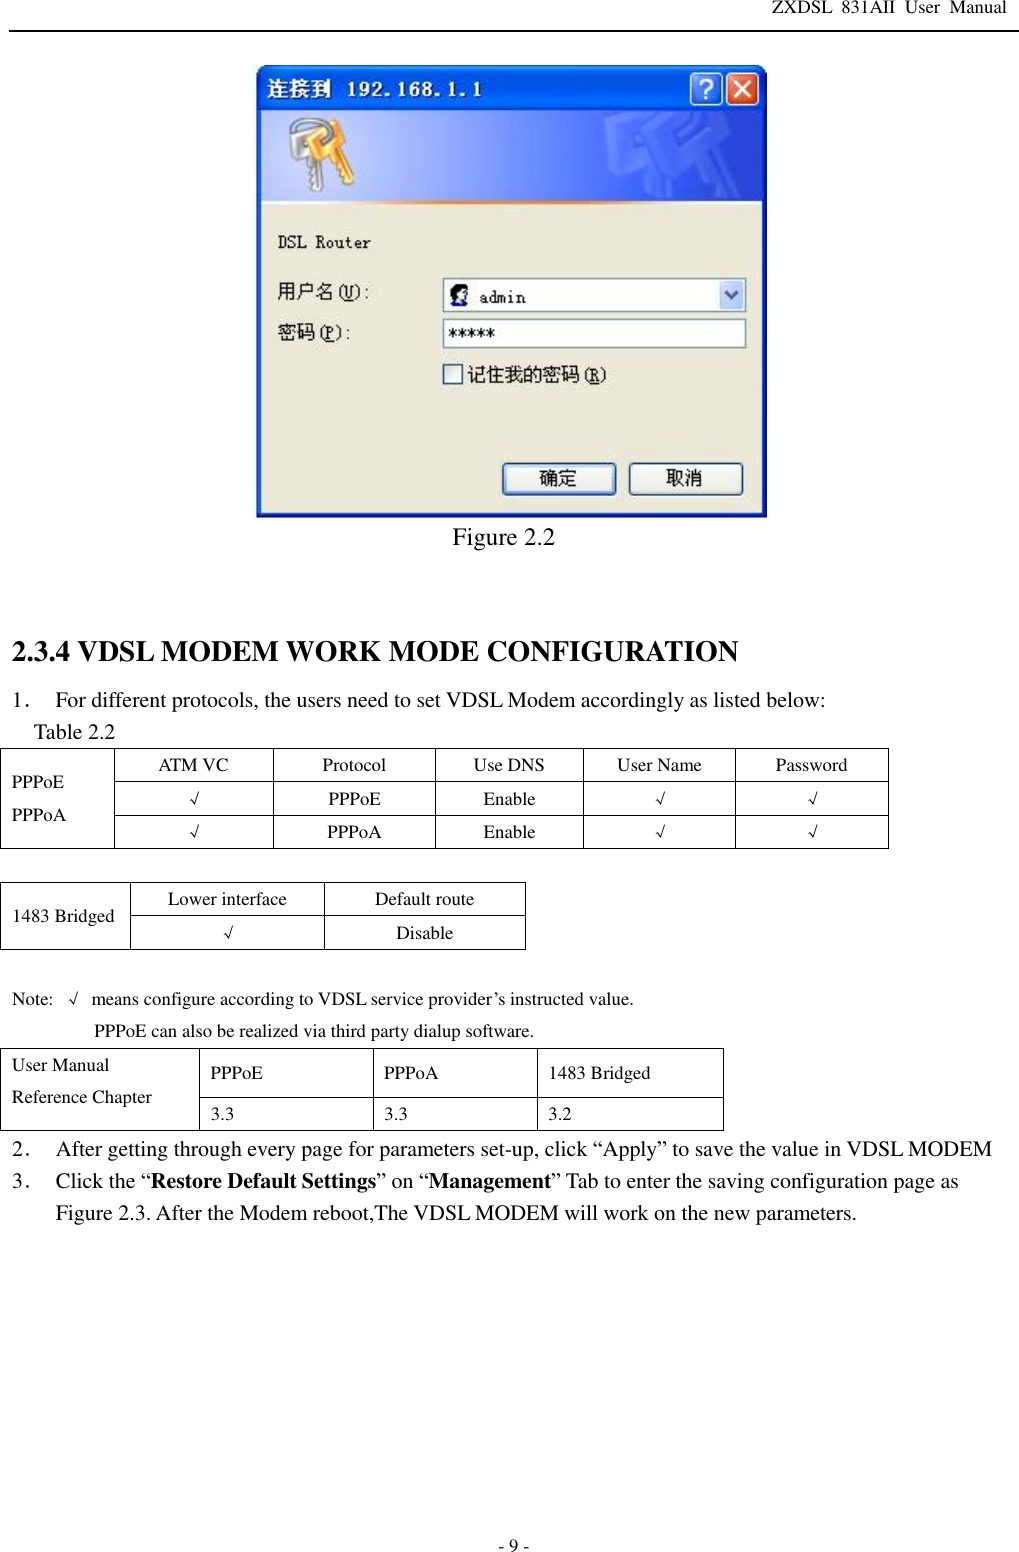 ZXDSL 831AII User Manual  - 9 -    Figure 2.2   2.3.4 VDSL MODEM WORK MODE CONFIGURATION 1． For different protocols, the users need to set VDSL Modem accordingly as listed below: Table 2.2  PPPoE PPPoA ATM VC  Protocol  Use DNS  User Name  Password √ PPPoE  Enable  √ √ √ PPPoA  Enable  √ √  1483 Bridged Lower interface  Default route √ Disable  Note:  √ means configure according to VDSL service provider’s instructed value. PPPoE can also be realized via third party dialup software. User Manual Reference Chapter PPPoE  PPPoA  1483 Bridged 3.3  3.3  3.2 2． After getting through every page for parameters set-up, click “Apply” to save the value in VDSL MODEM 3． Click the “Restore Default Settings” on “Management” Tab to enter the saving configuration page as Figure 2.3. After the Modem reboot,The VDSL MODEM will work on the new parameters.  